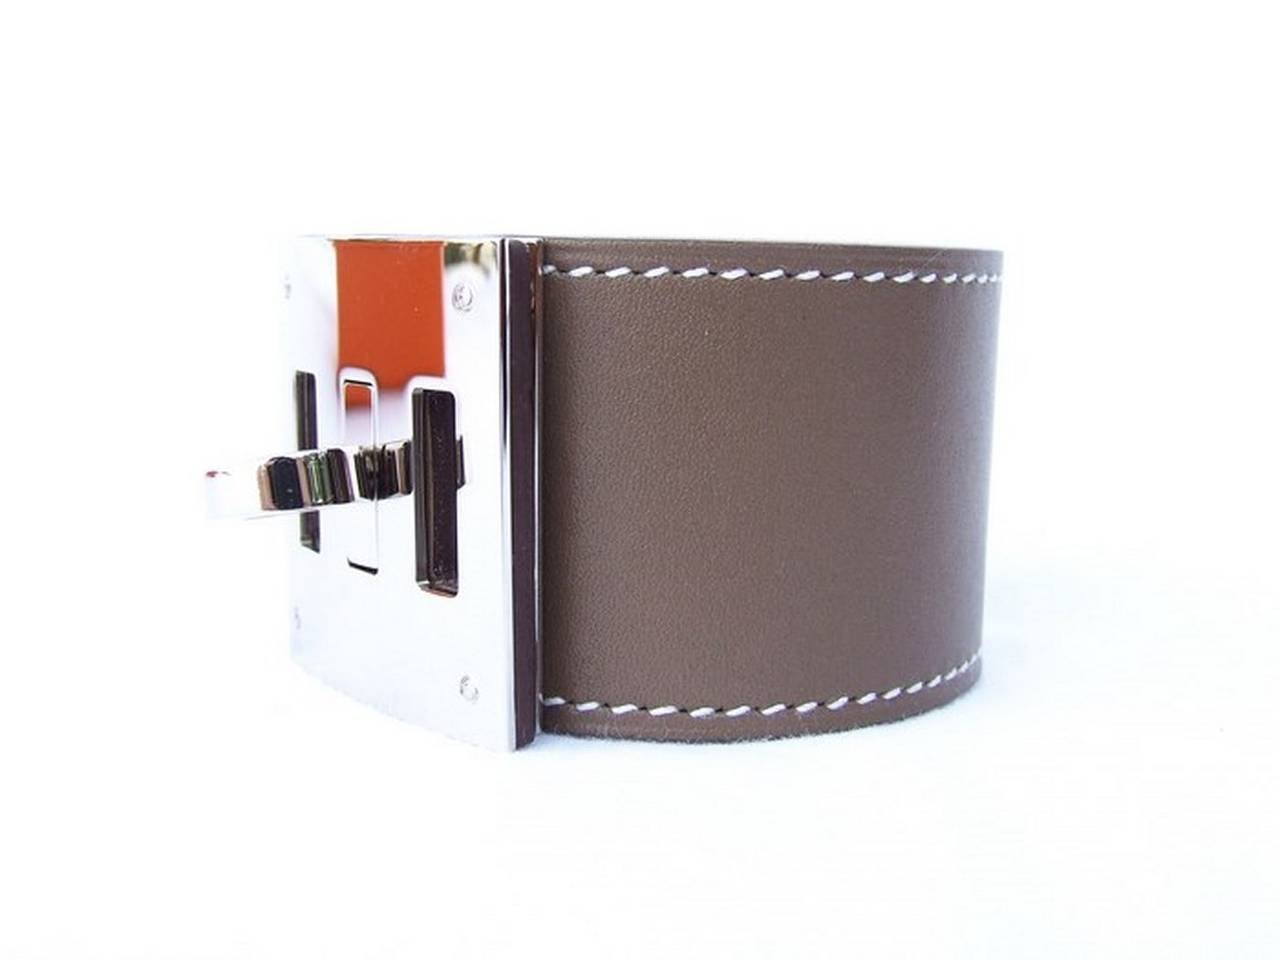 BEAUTIFUL AUTHENTIC HERMES BRACELET
 
KELLY DOG

Made In France, stamp Q

Made of veau tadelakt leather

Colors: Etoupe (light brown) leather, white stitching, Palladium (silver tone) hardware

Length (hardware included): 19,7 cm (7,76